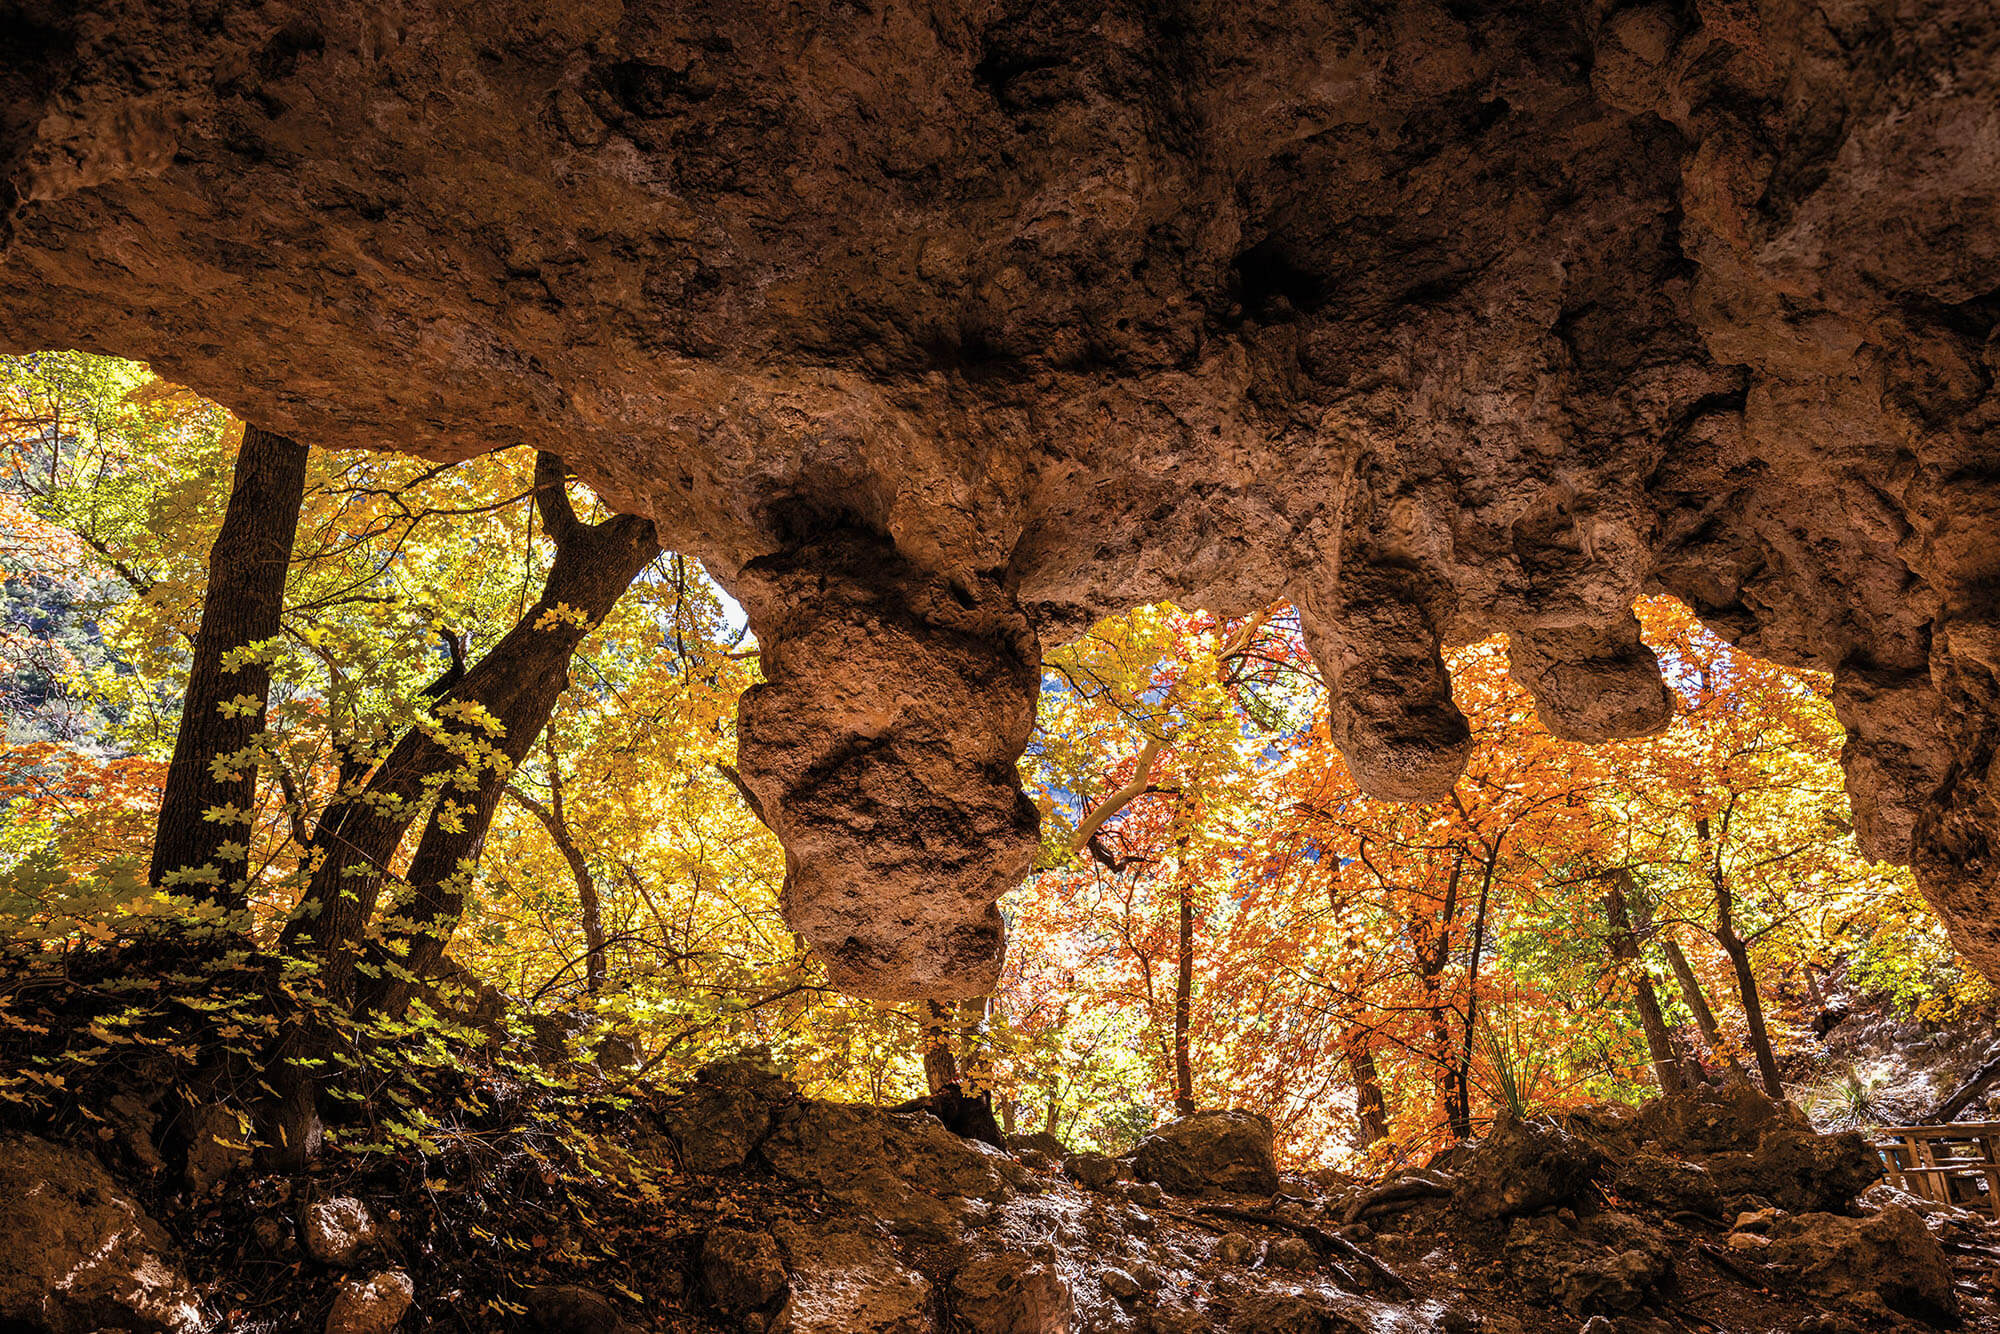 Several large brown rock croppings are visible at the mouth of a cave surrounded by fall foliage 